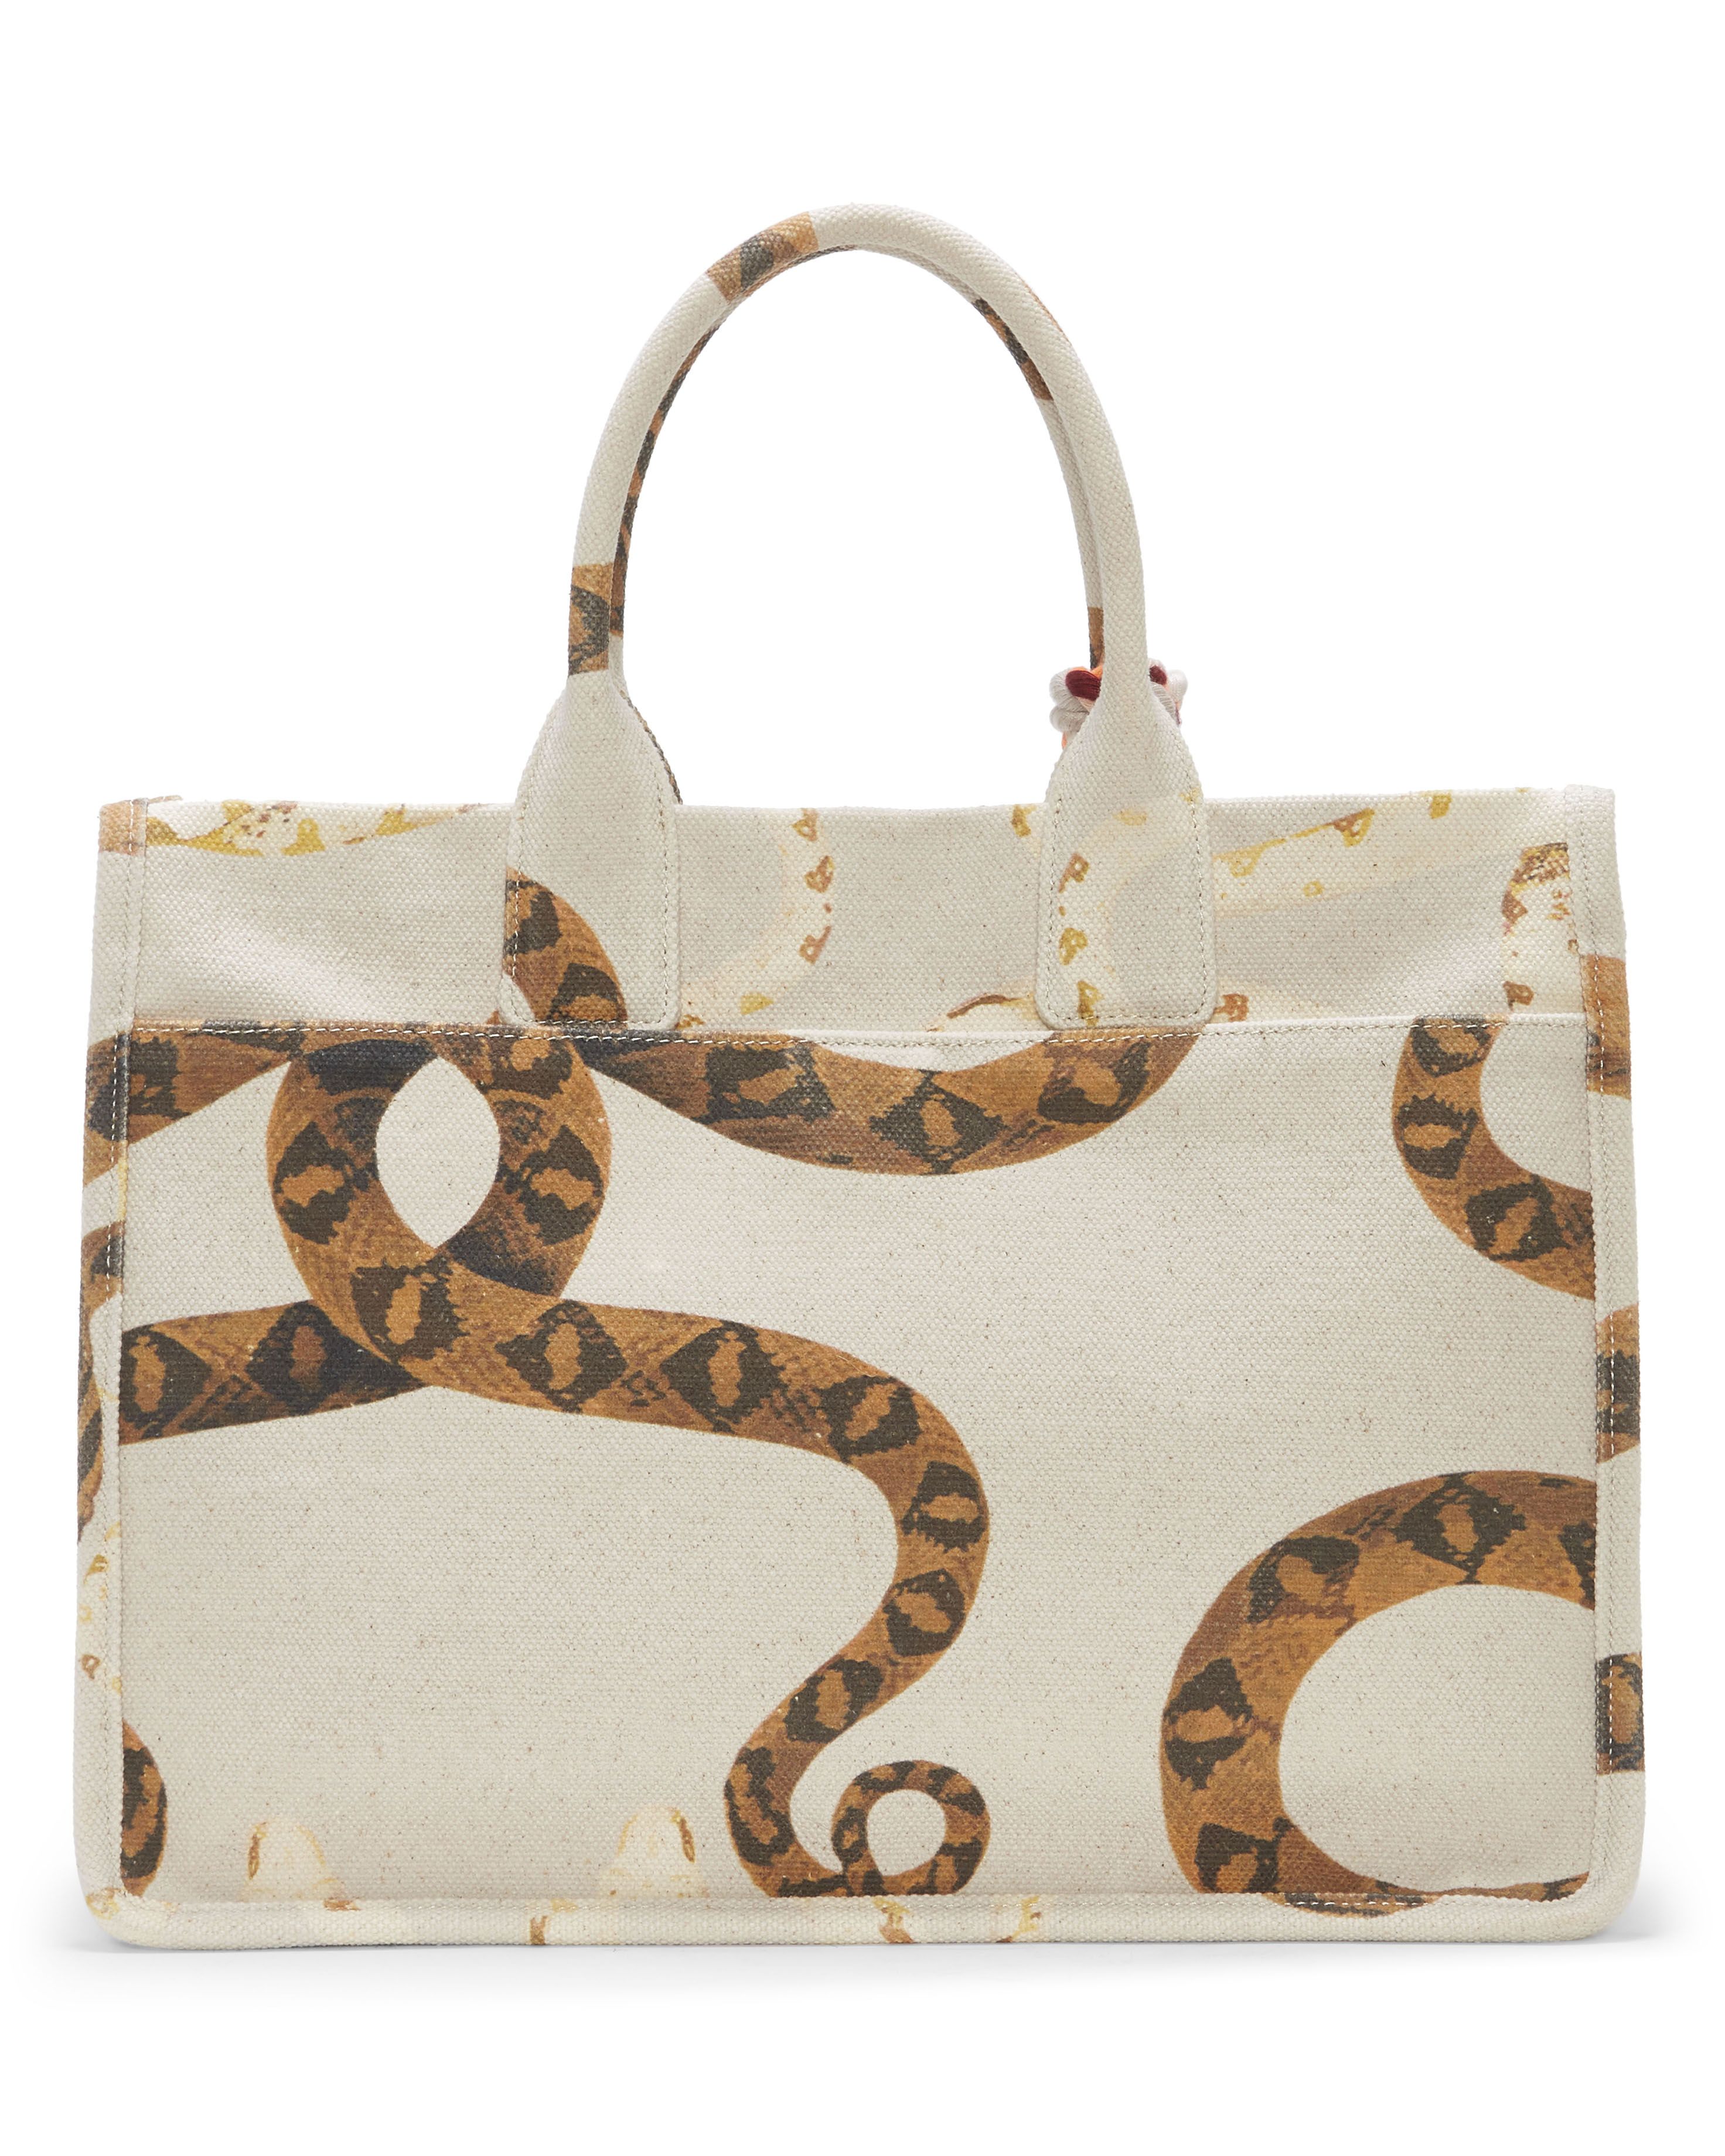 Vince Camuto Orla Tote | Vince Camuto